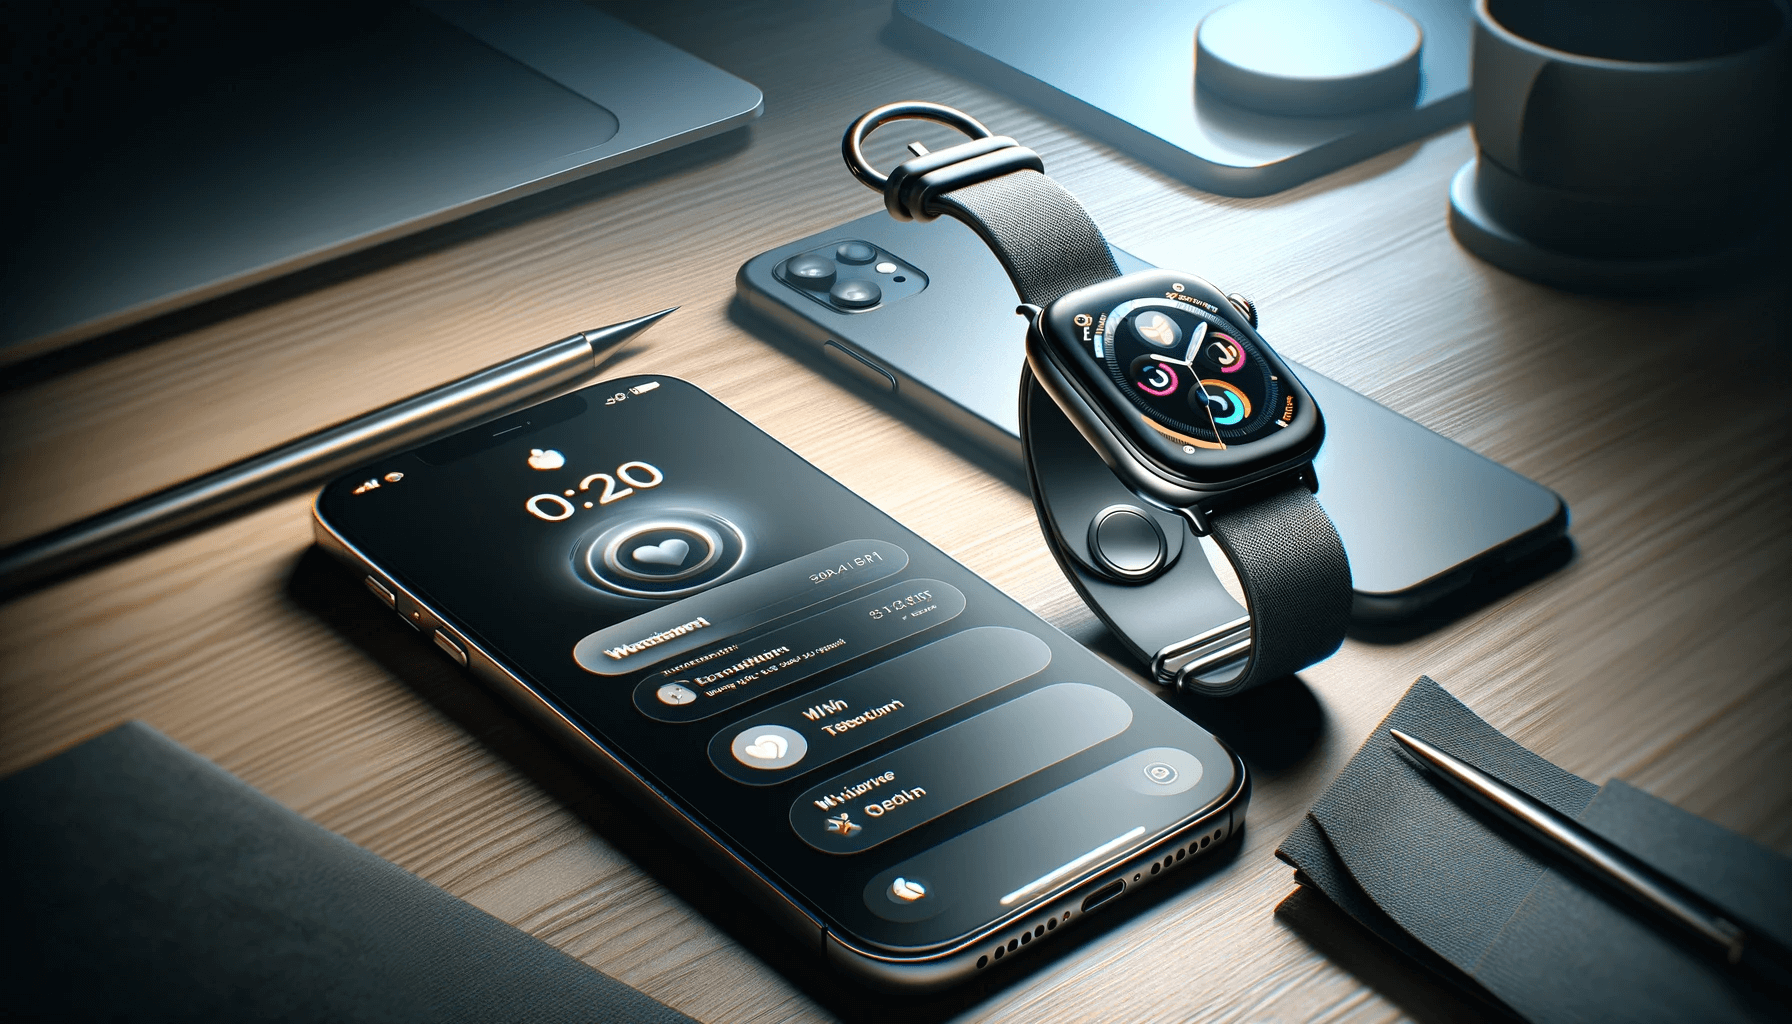 DALL·E 2023 11 15 15.08.21 A digital illustration of a smartwatch and an iPhone. The smartwatch is depicted with its screen on showing a modern and interactive interface strap 1